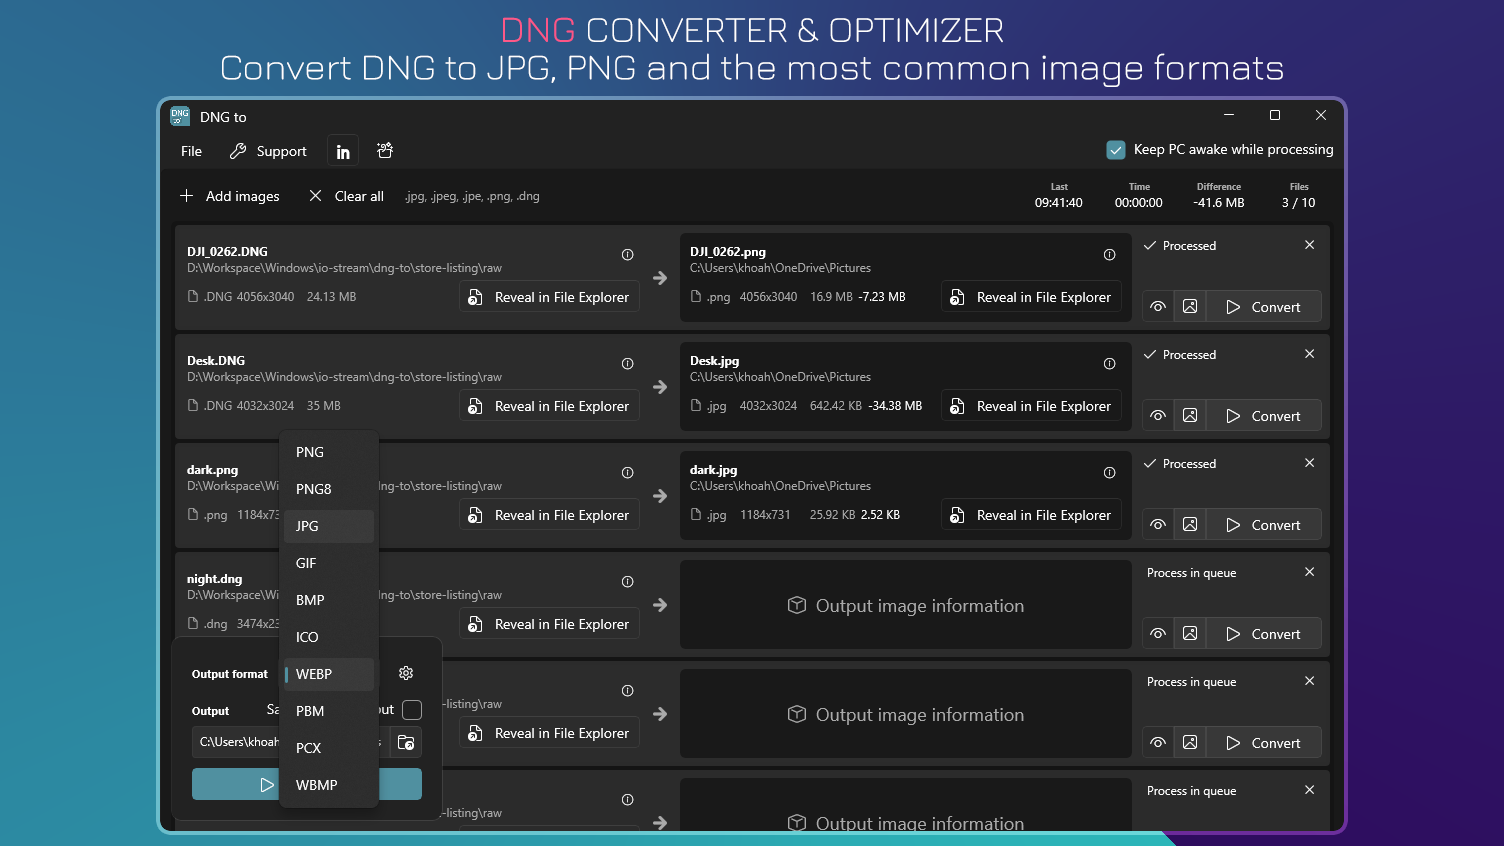 DNG Converter & Optimizer - Convert DNG to JPG, PNG and the most common image formats.